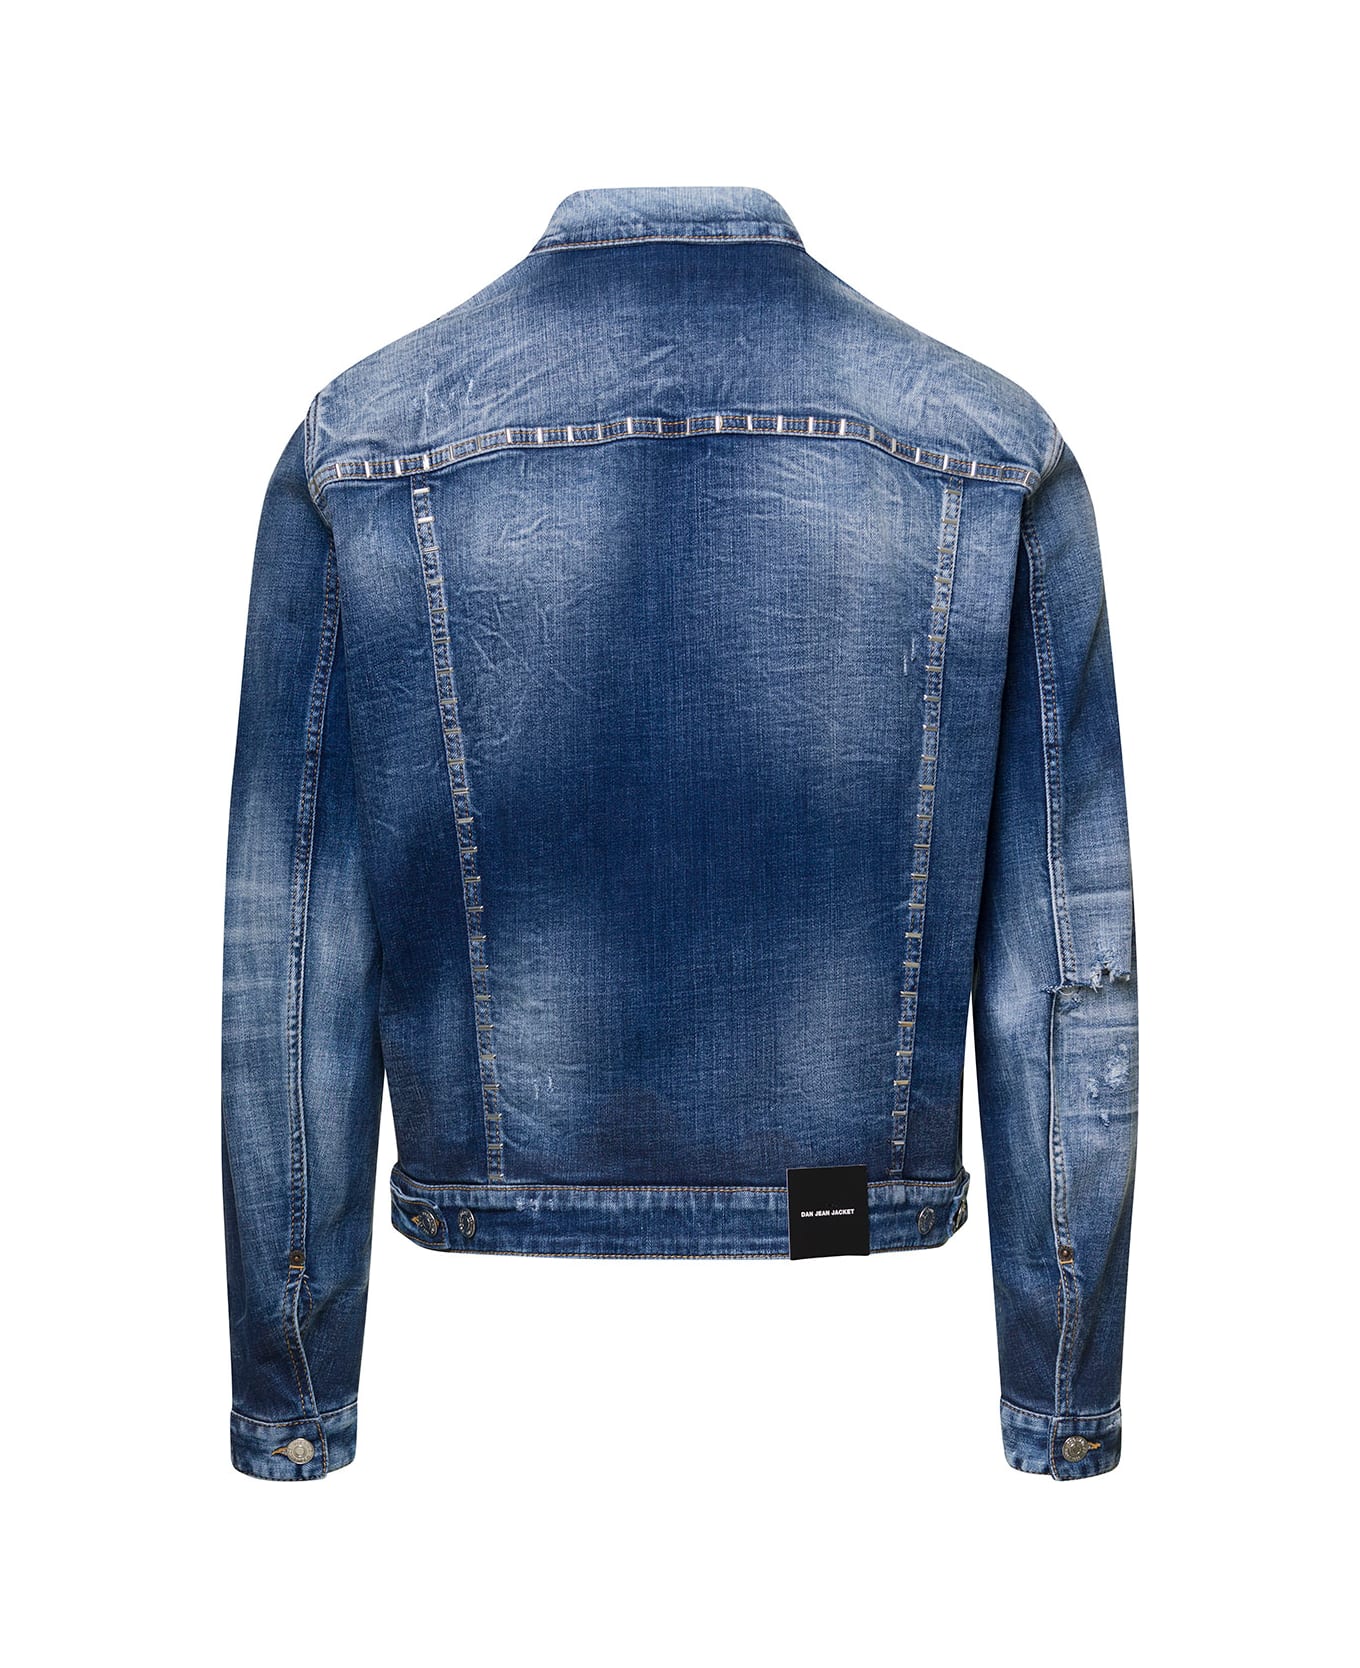 Dsquared2 Blue Jacket With Light Wash And Hand-written Note Detail In Denim Cotton Man - Blu